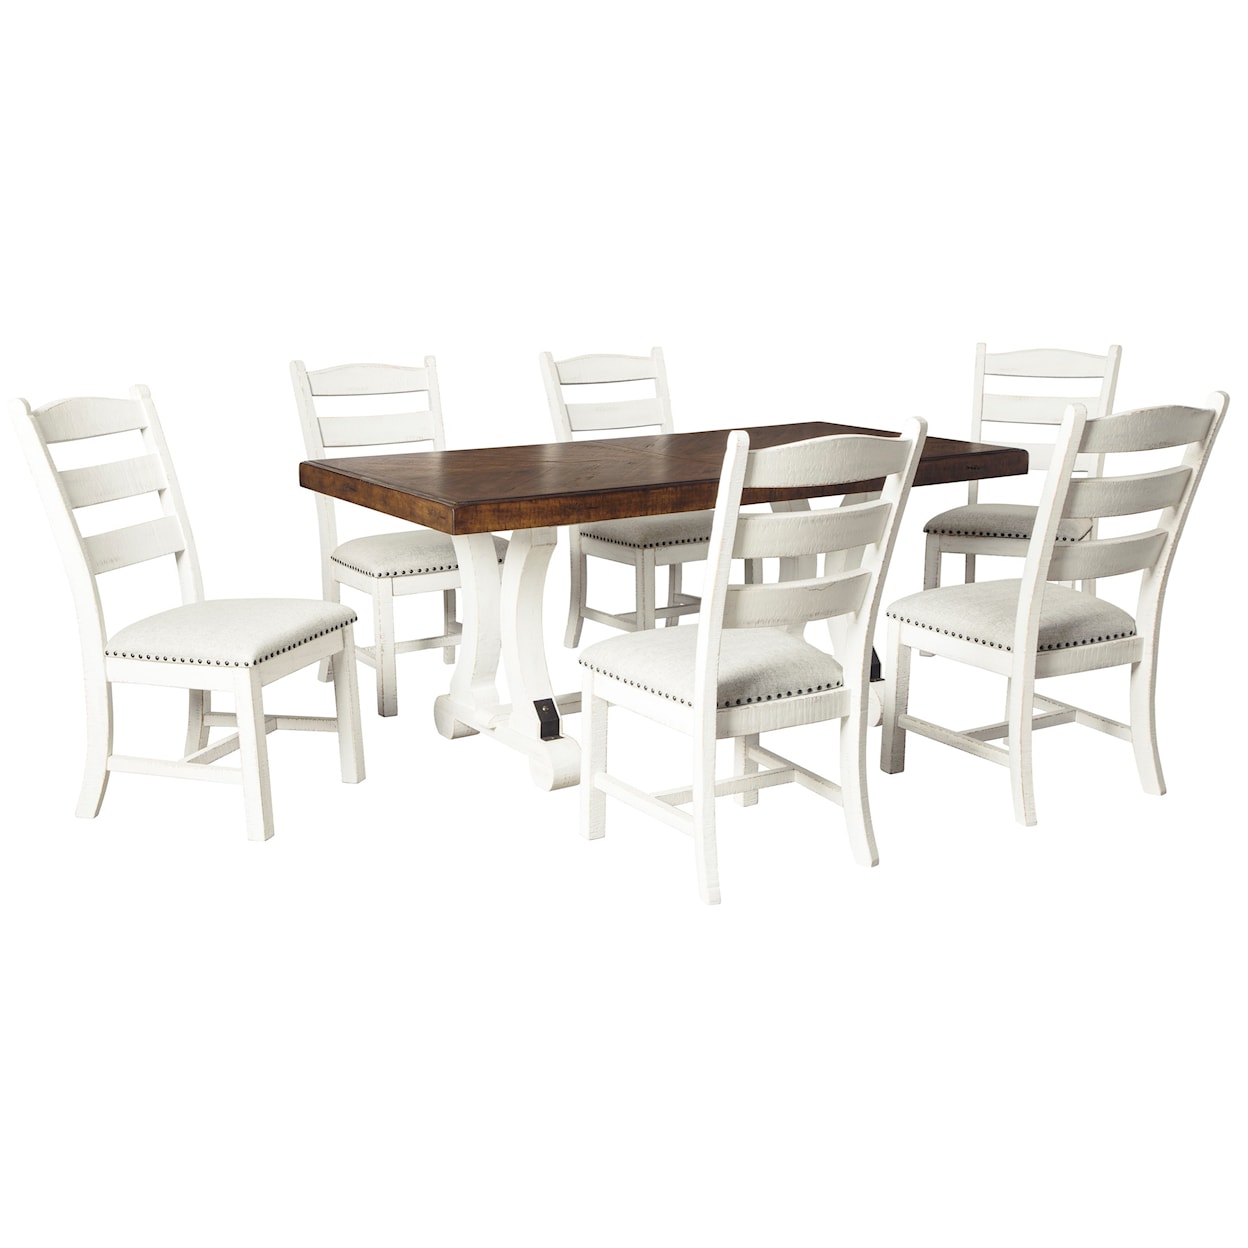 Michael Alan Select Valebeck 7-Piece Table and Chair Set